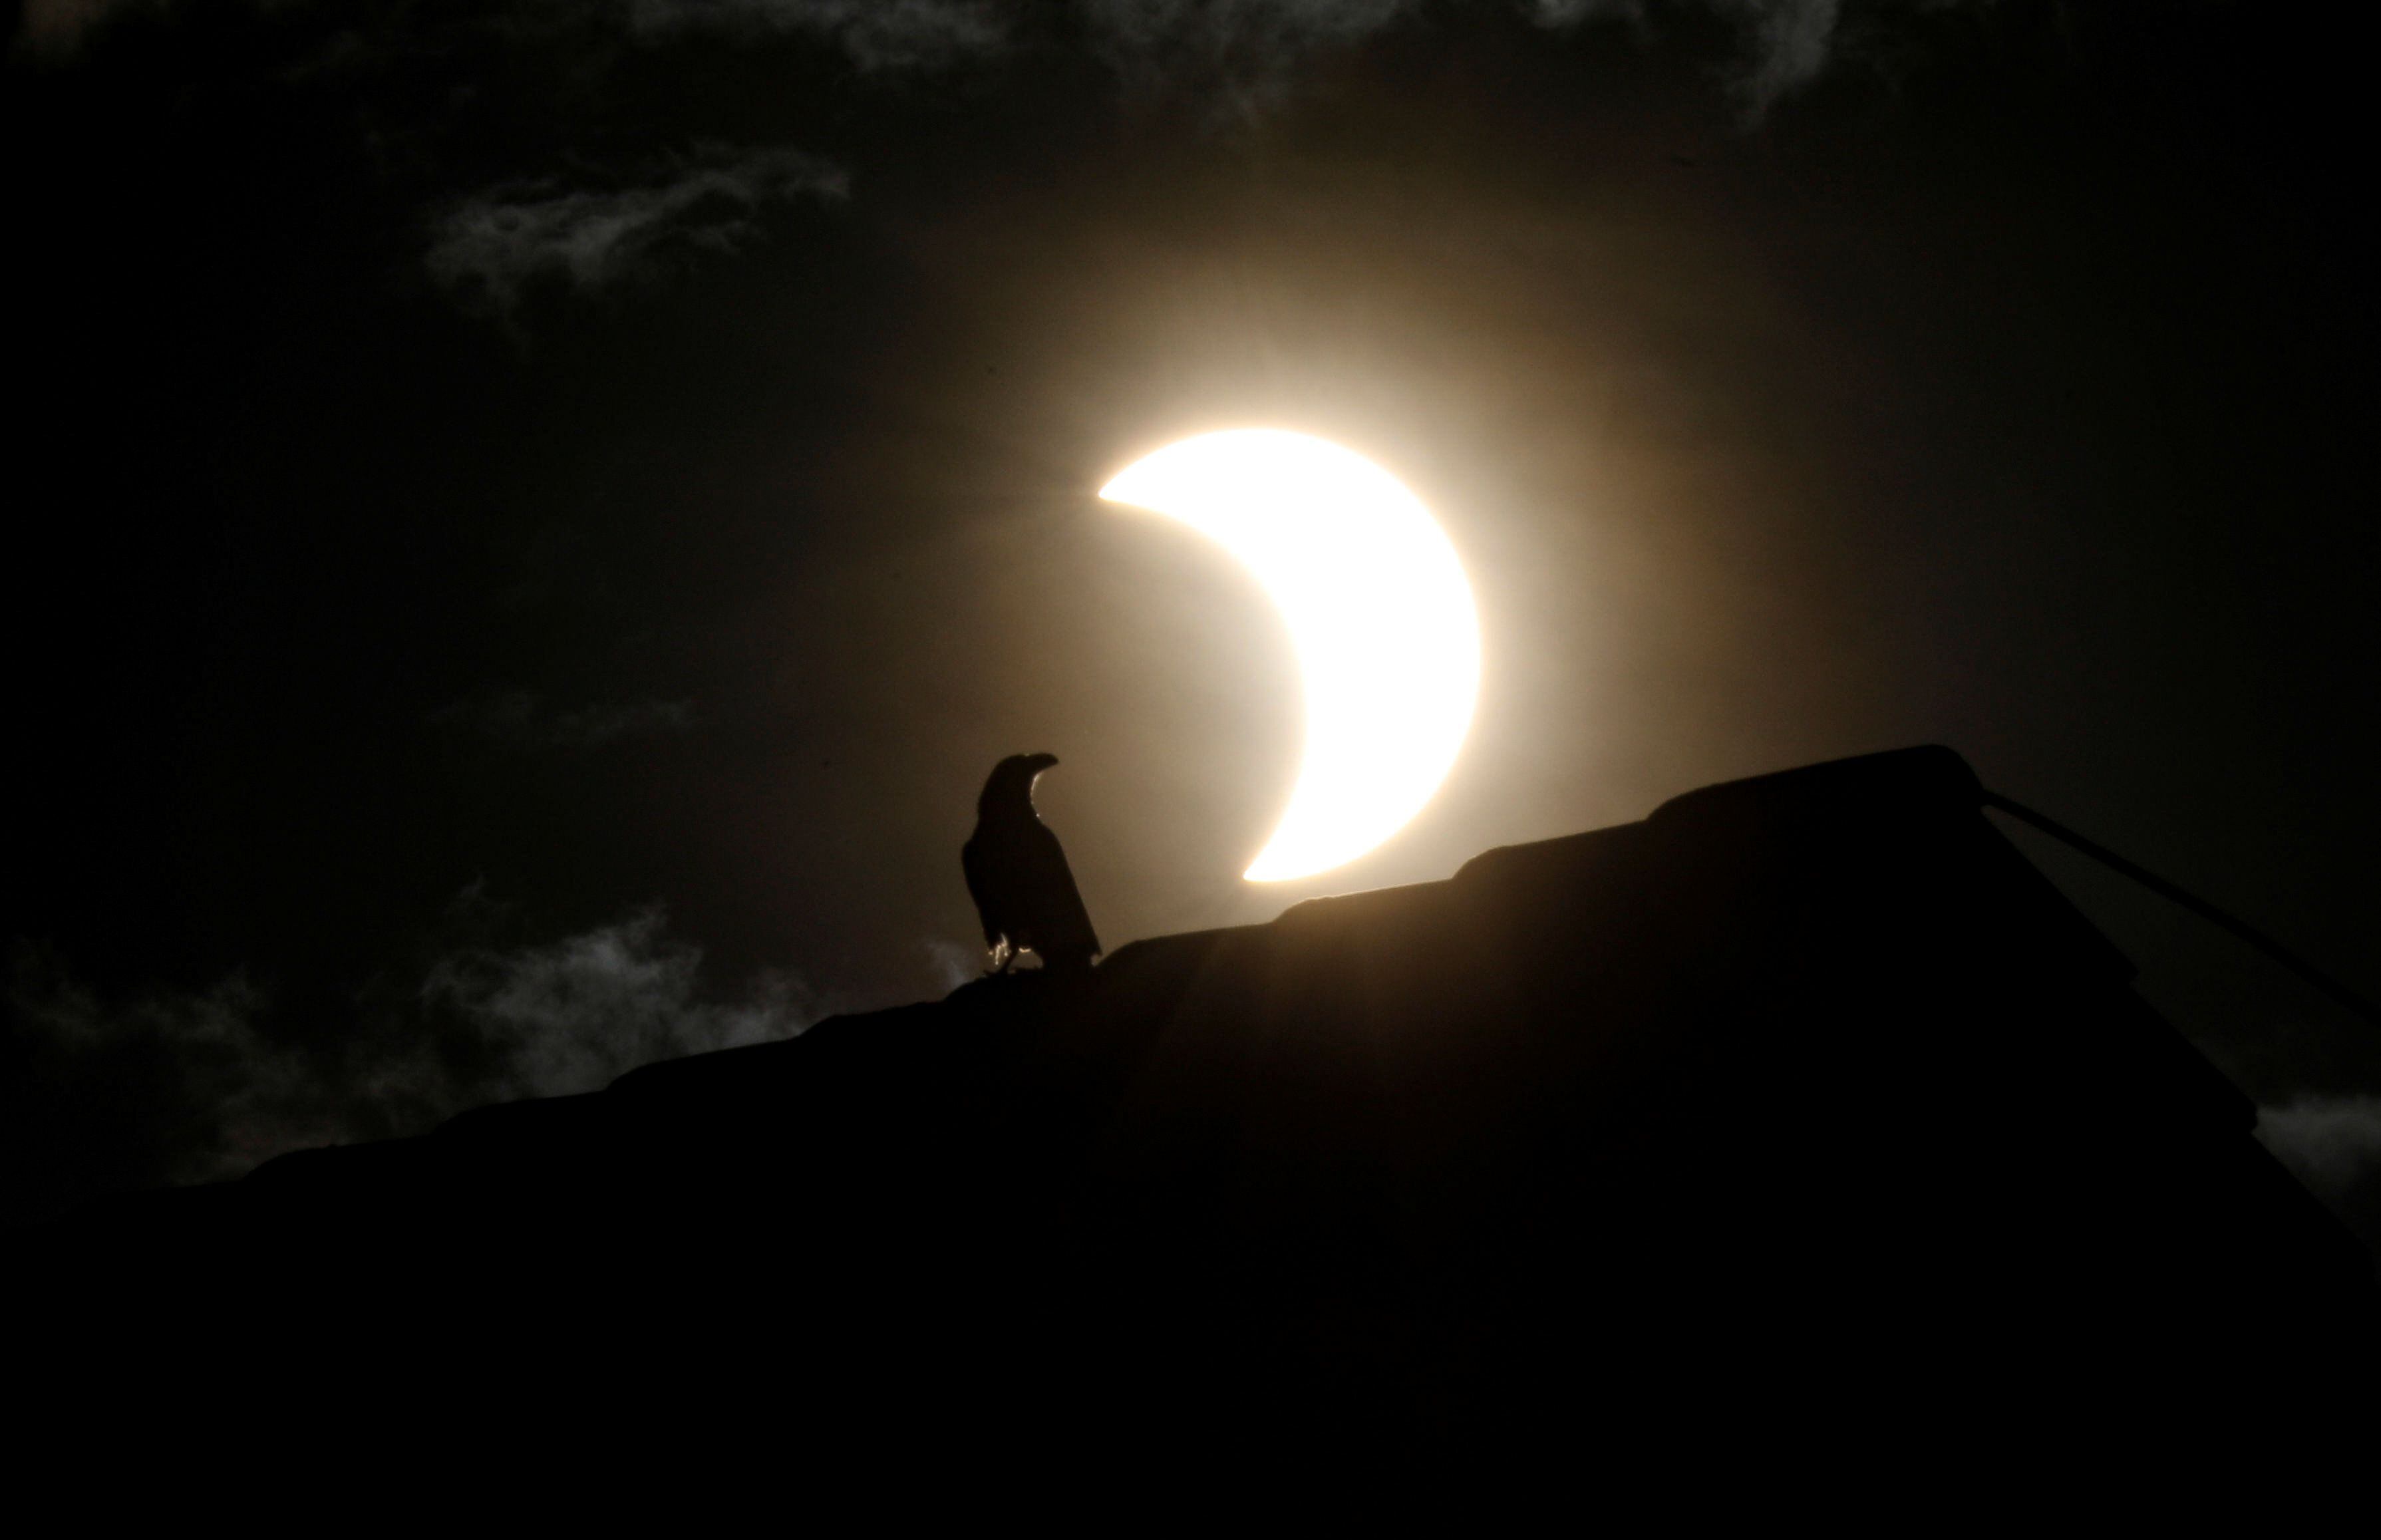 A crow stands on a roof as a partial solar eclipse is observed in Nairobi, Kenya, June 21, 2020. REUTERS/Baz Ratner